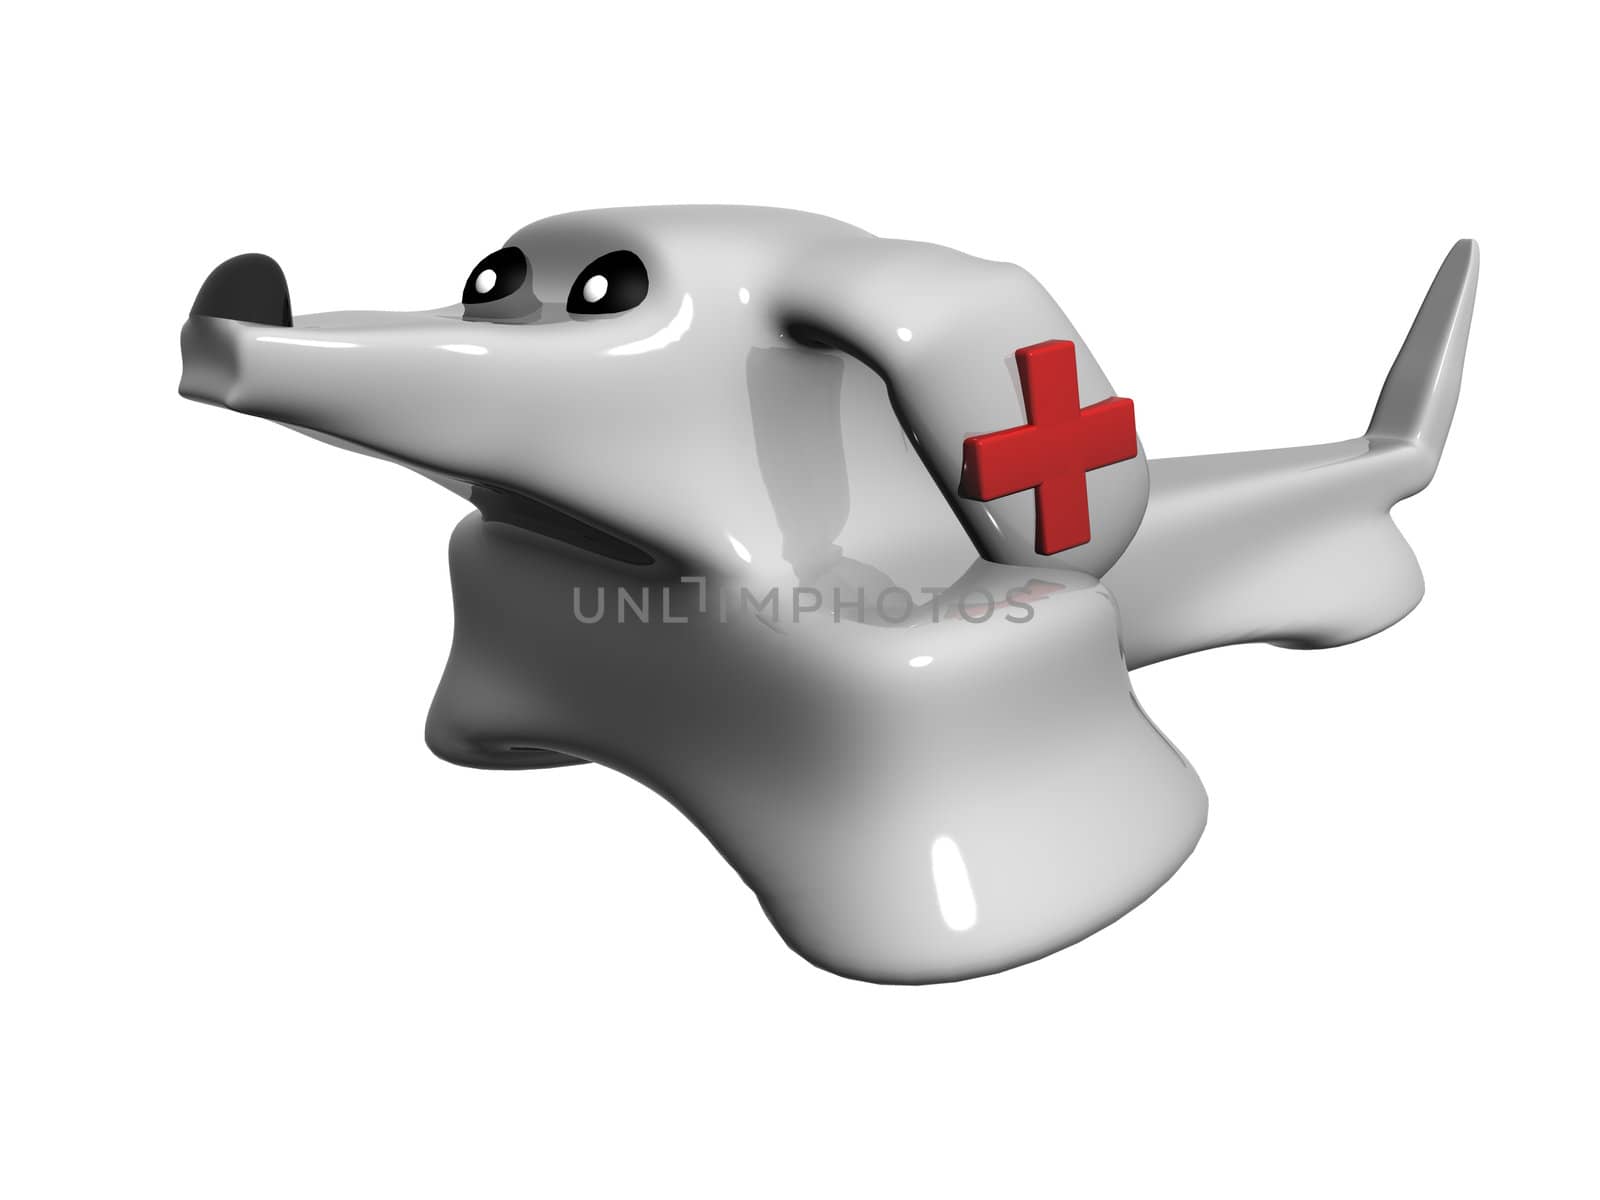 Porcelain dog the rescuer with a red cross on
an ear.